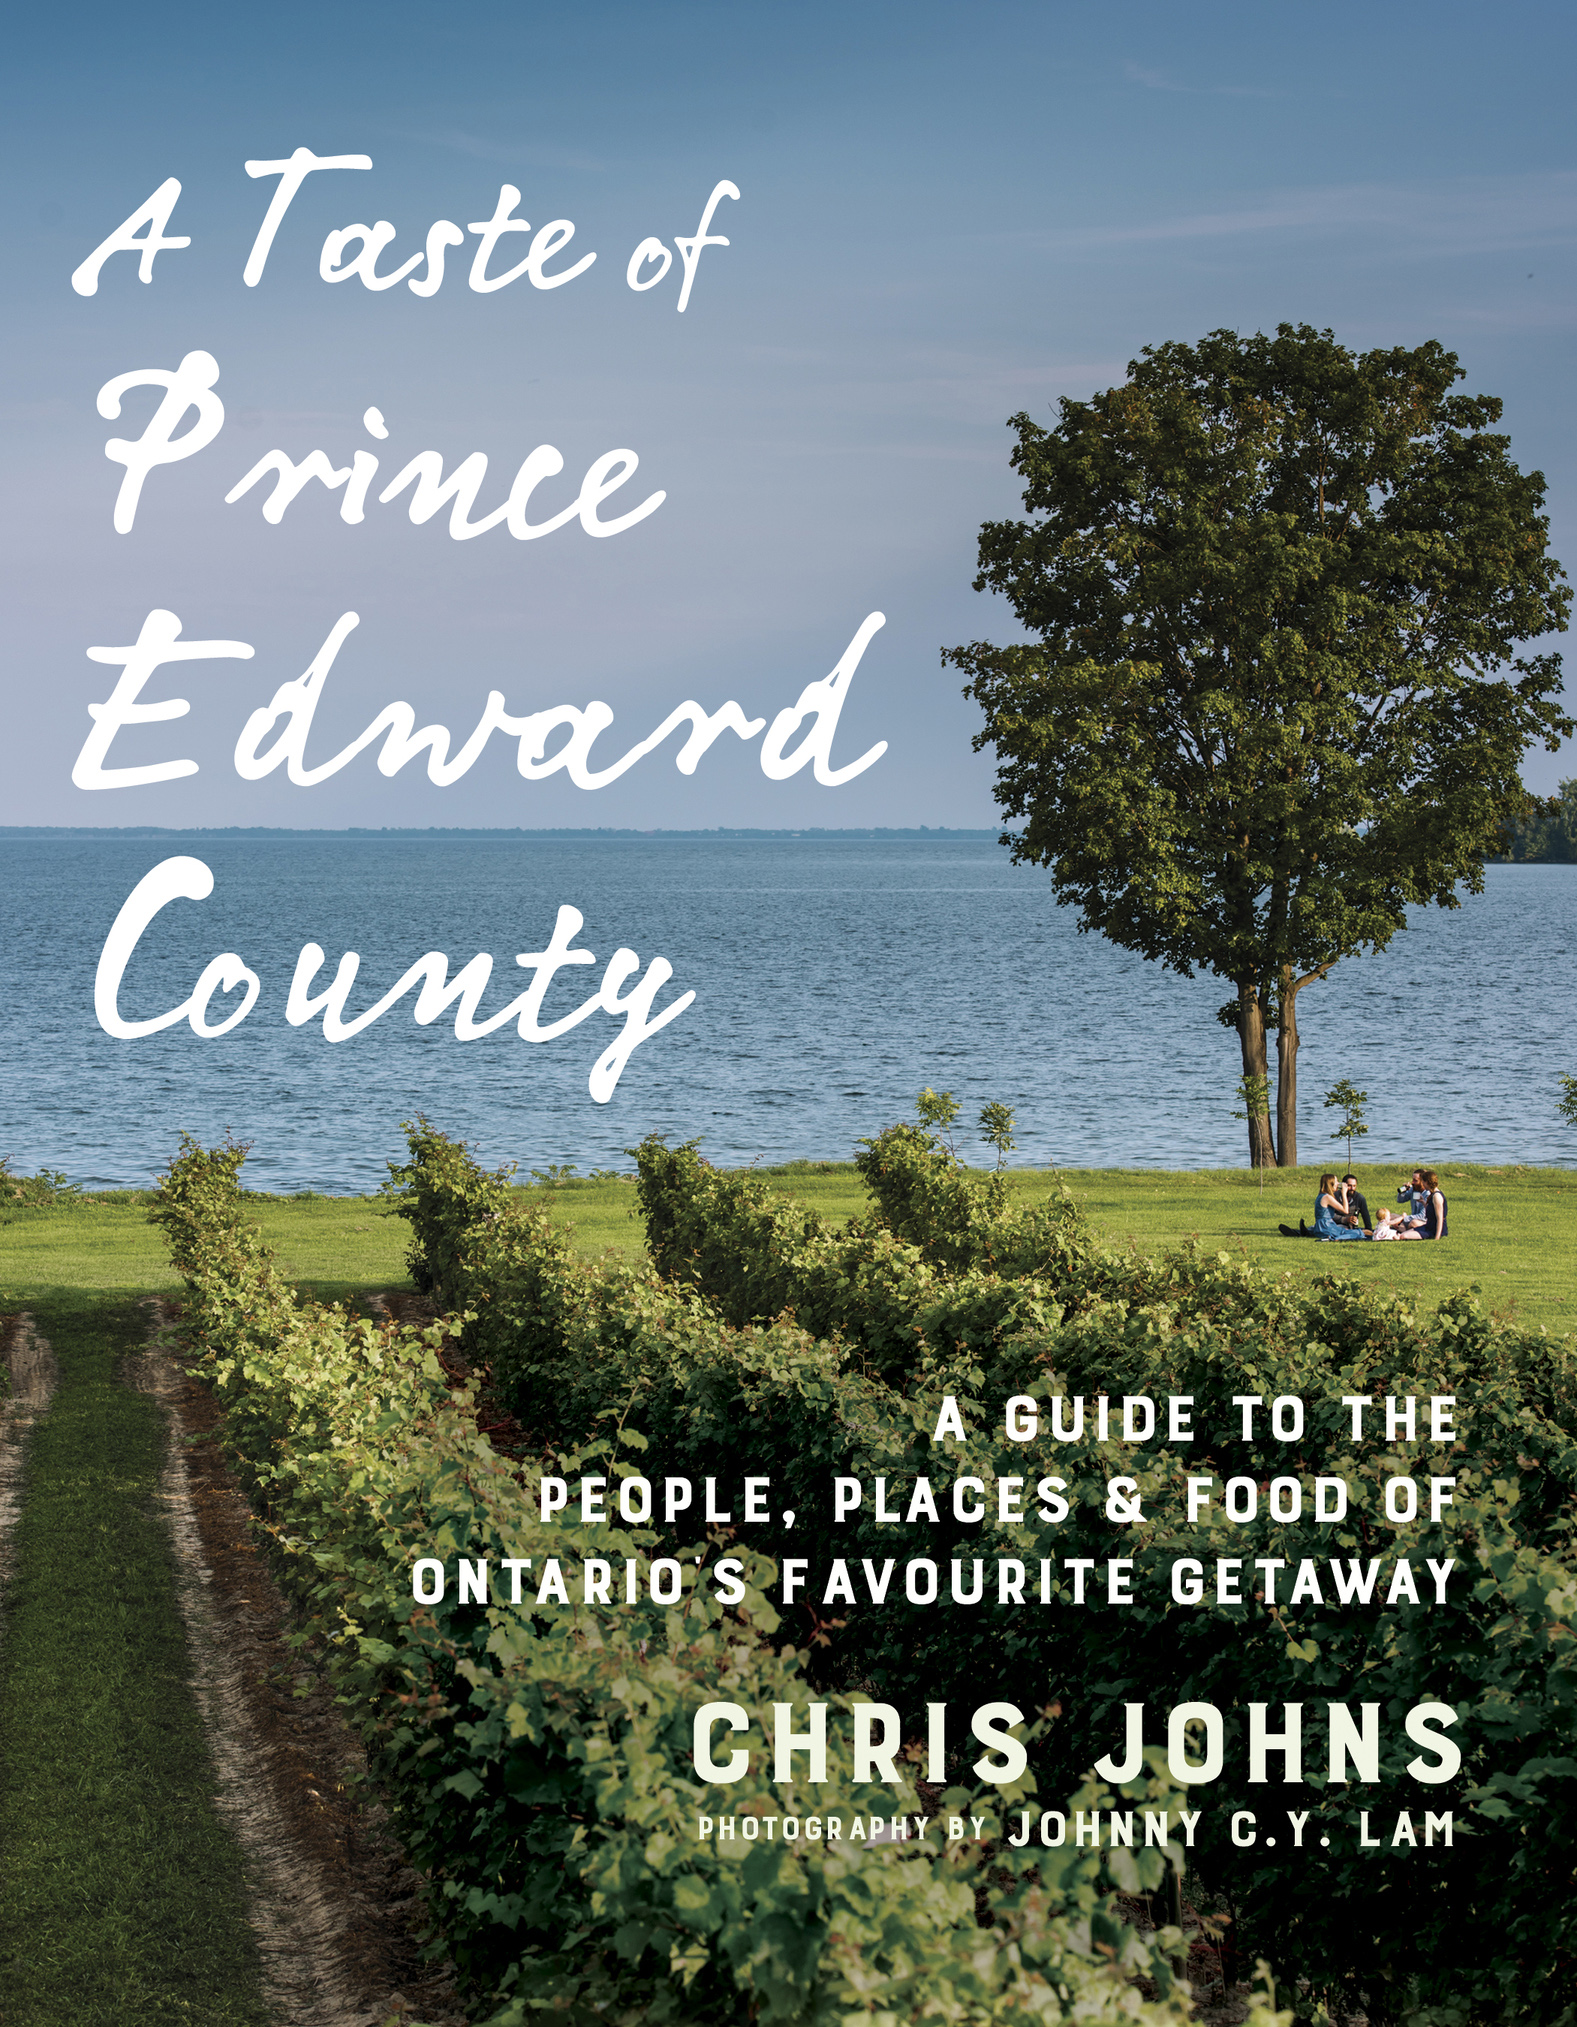 A taste of Prince Edward County a guide to the people places food of Ontarios favourite getaway - photo 1